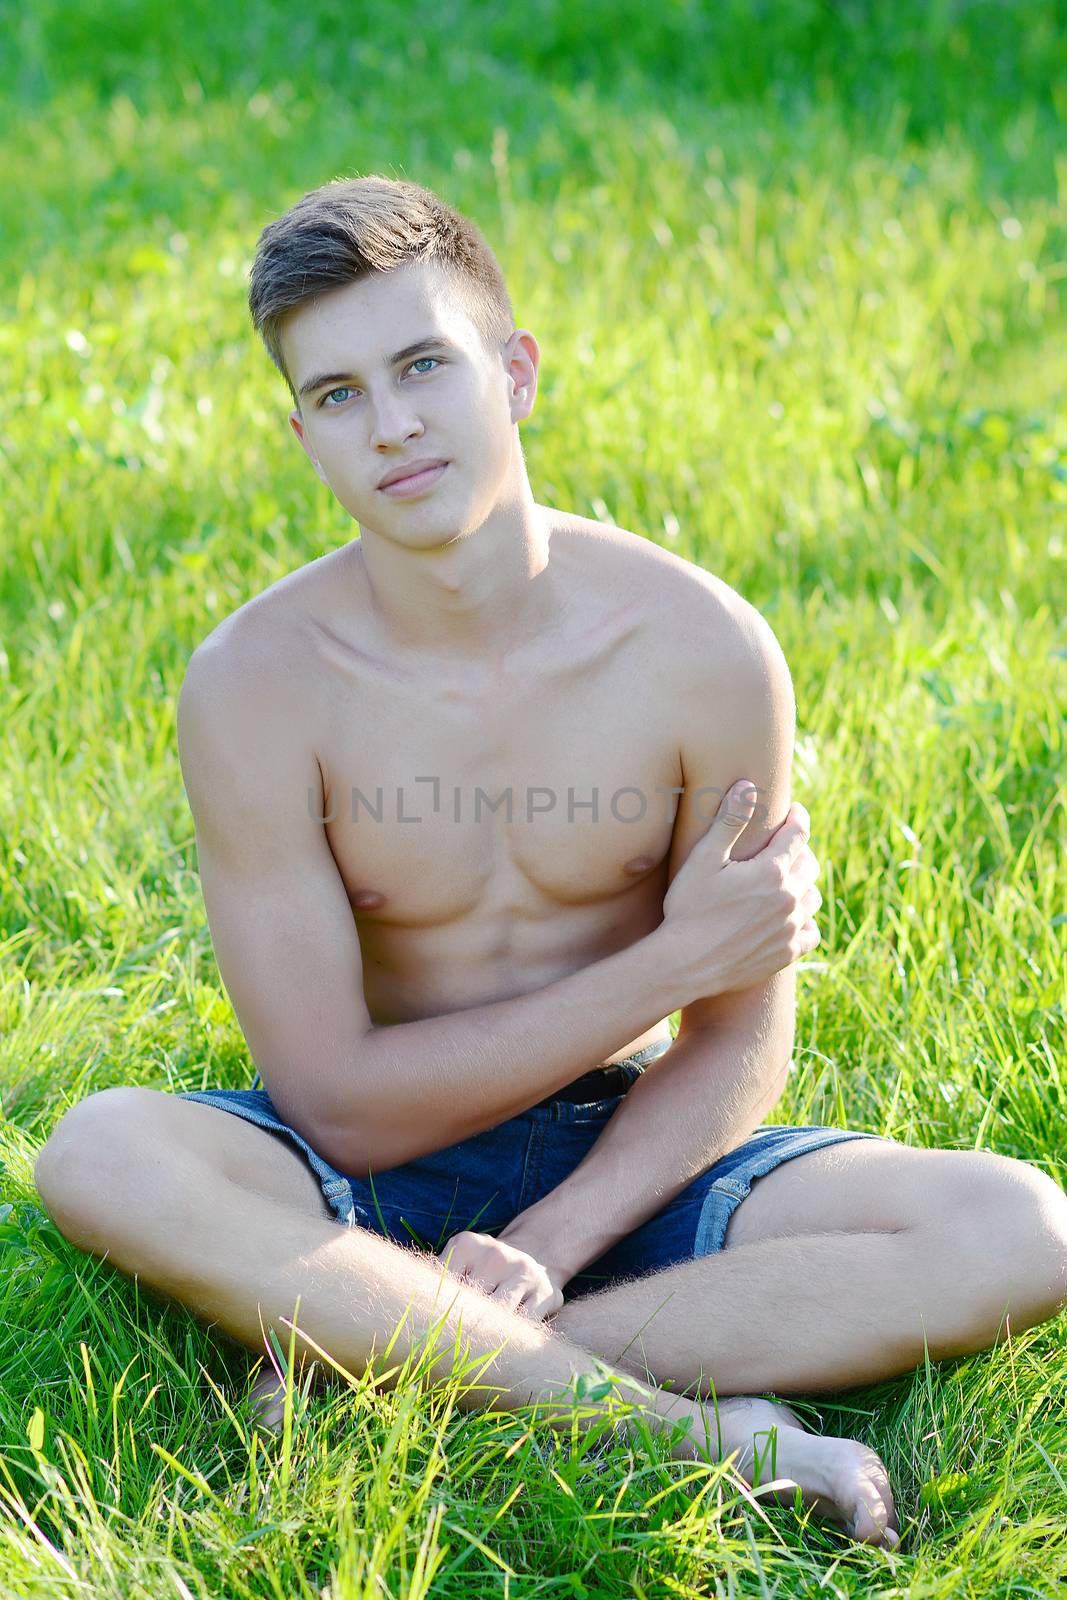 shirtless fit male on the grass photo by jordano